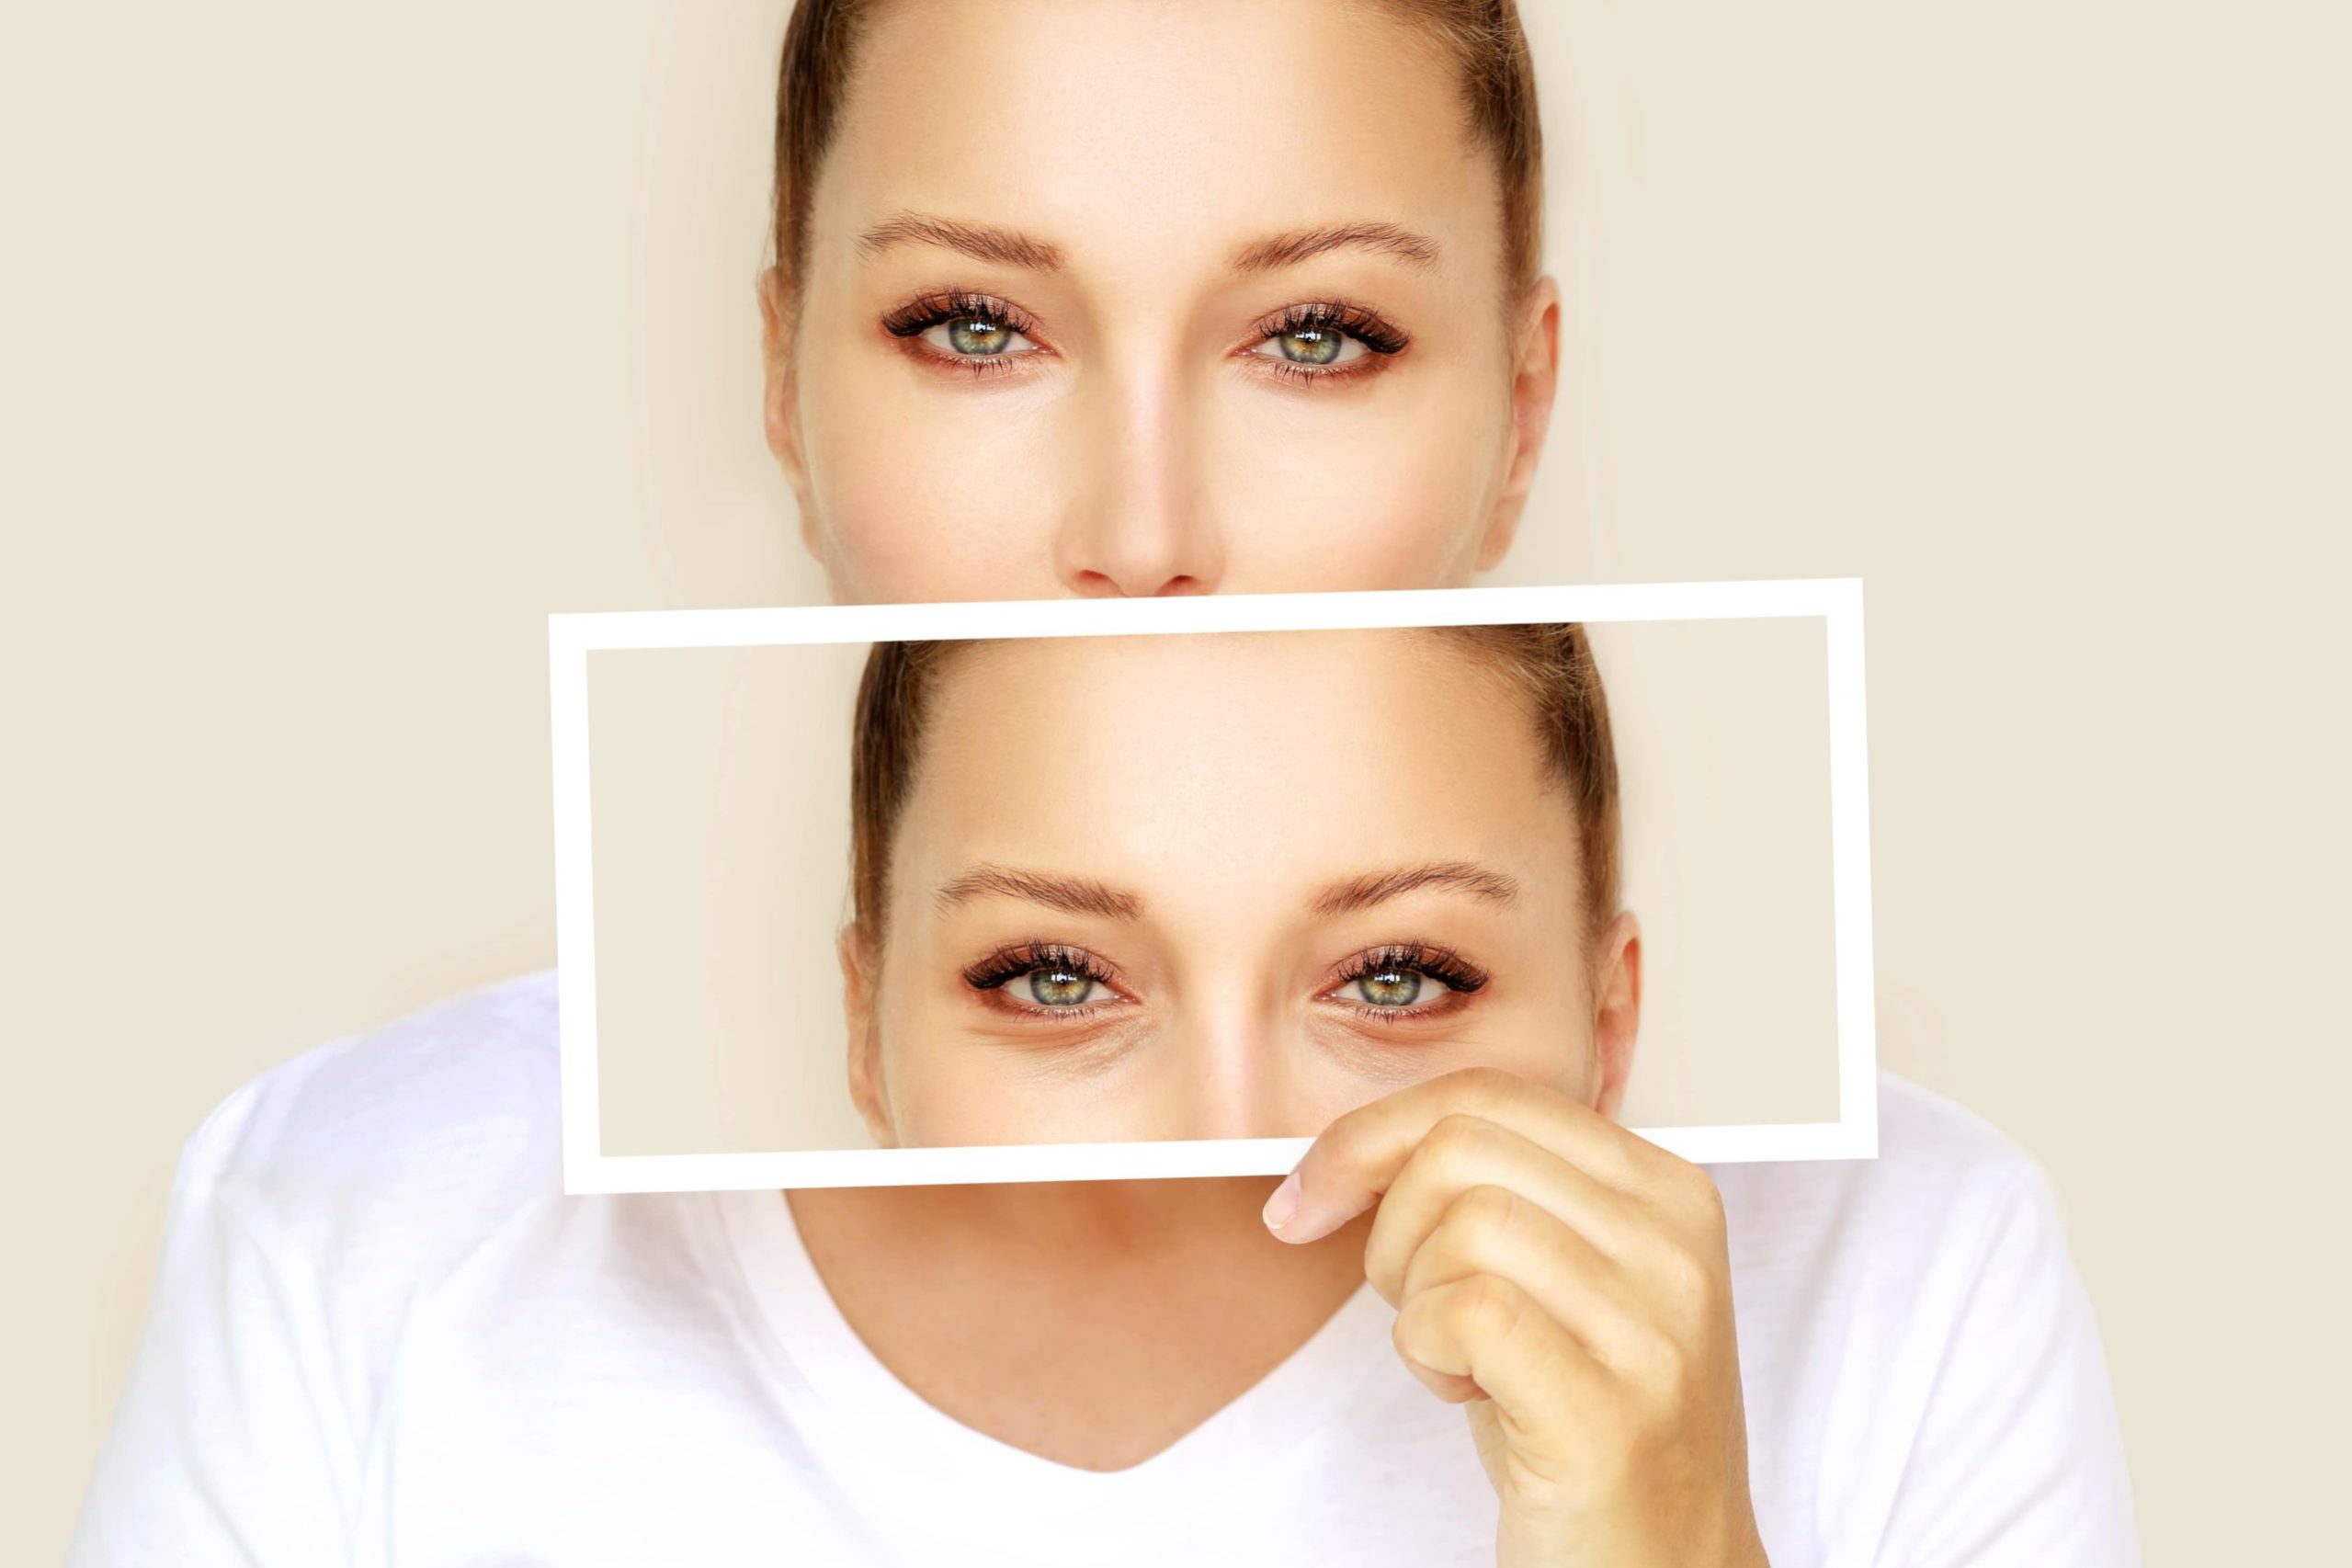 What Is A Blepharoplasty Or Eyelid Surgery